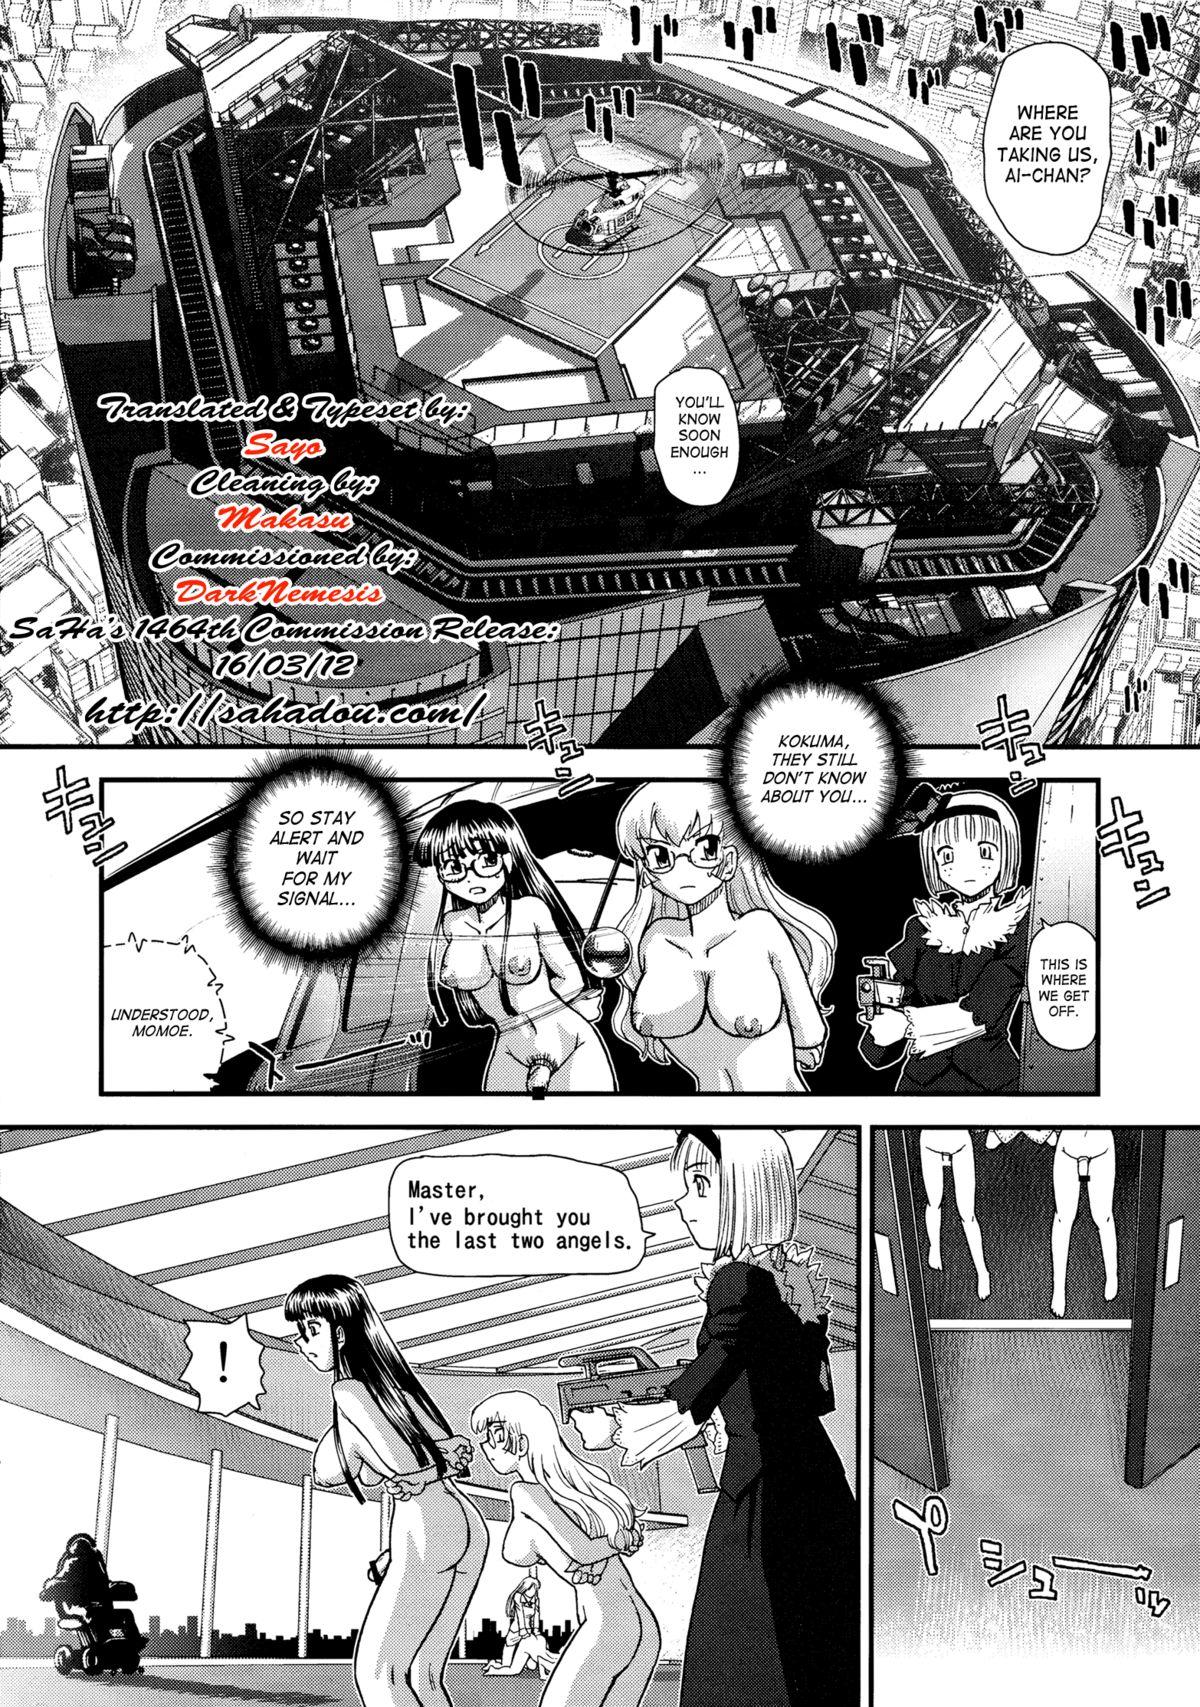 Chacal Dulce Report 14 Older - Page 5